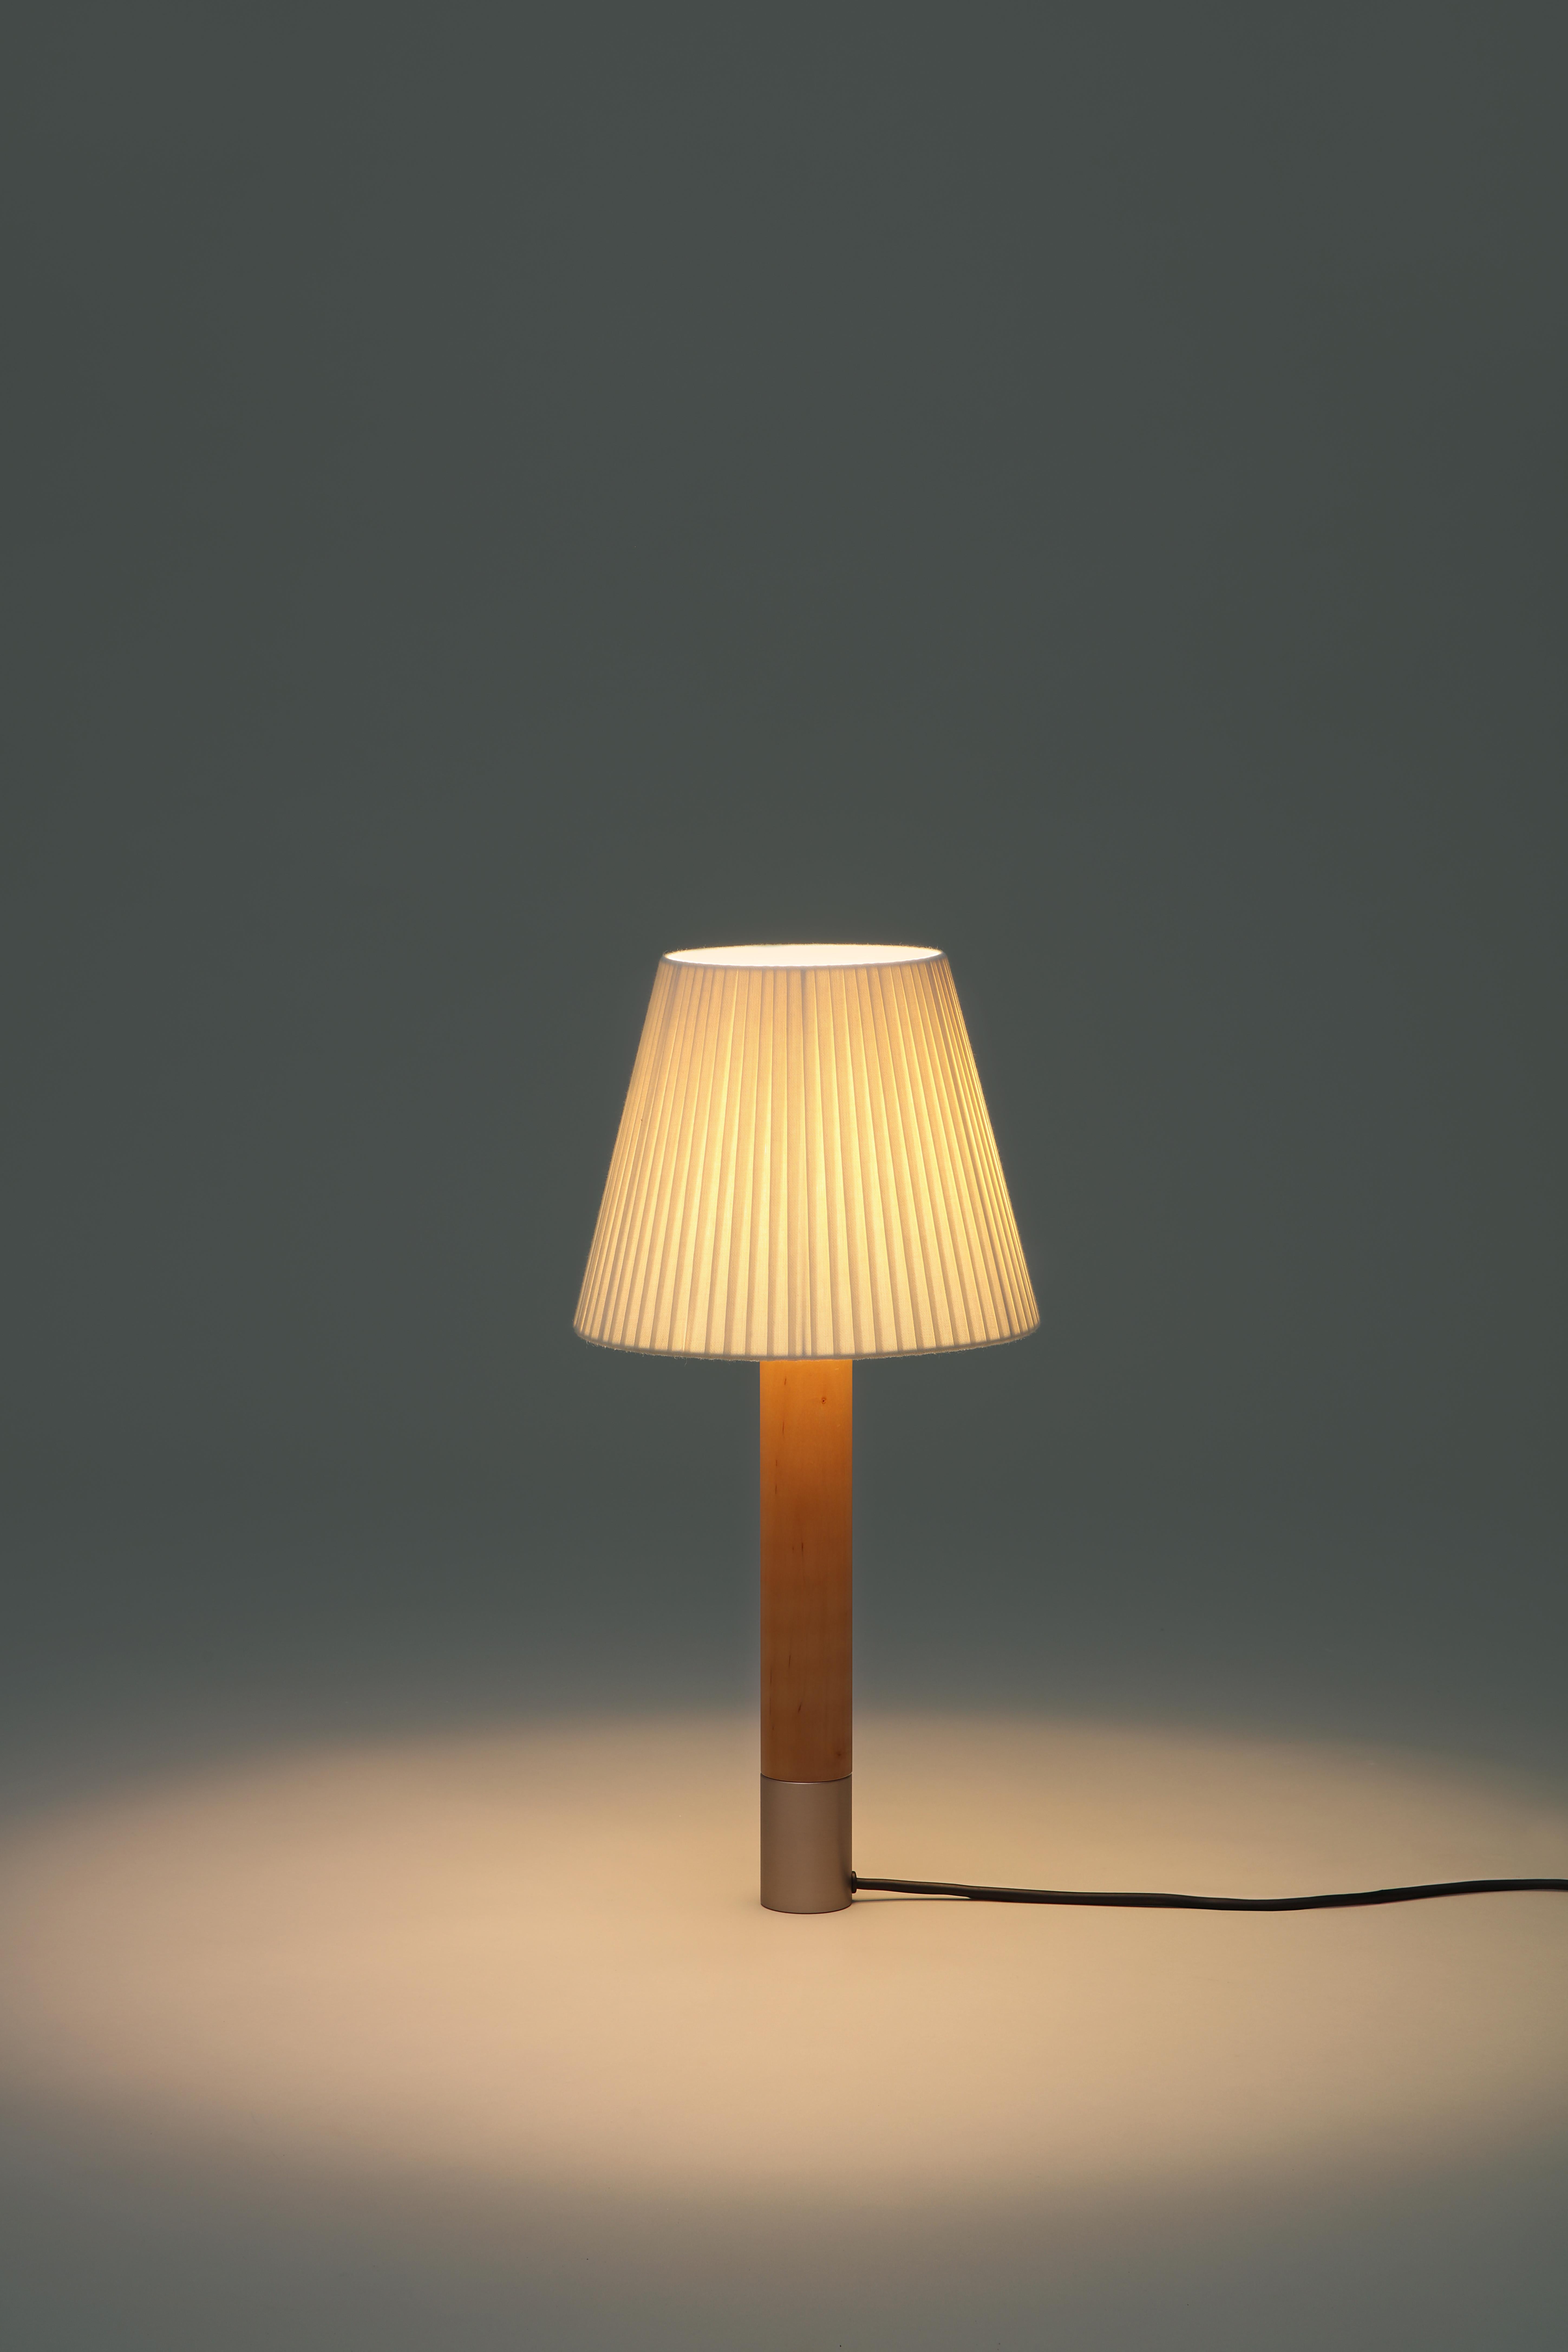 Spanish Nickel and Terracotta Básica M1 Table Lamp by Santiago Roqueta, Santa & Cole For Sale